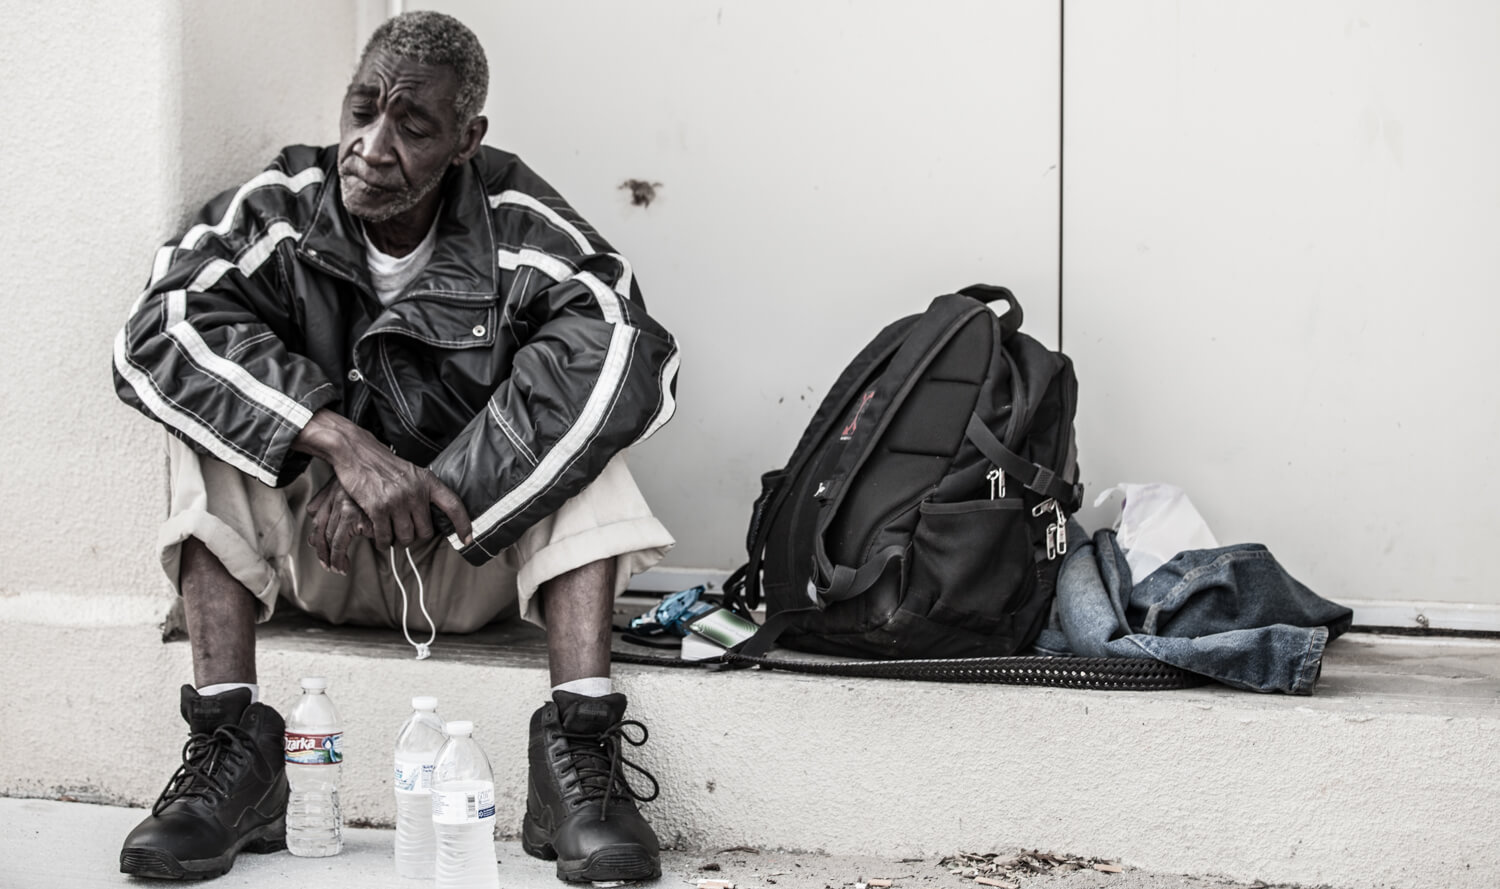 Only Temporary - Homeless in Dallas: Older man and his belongings